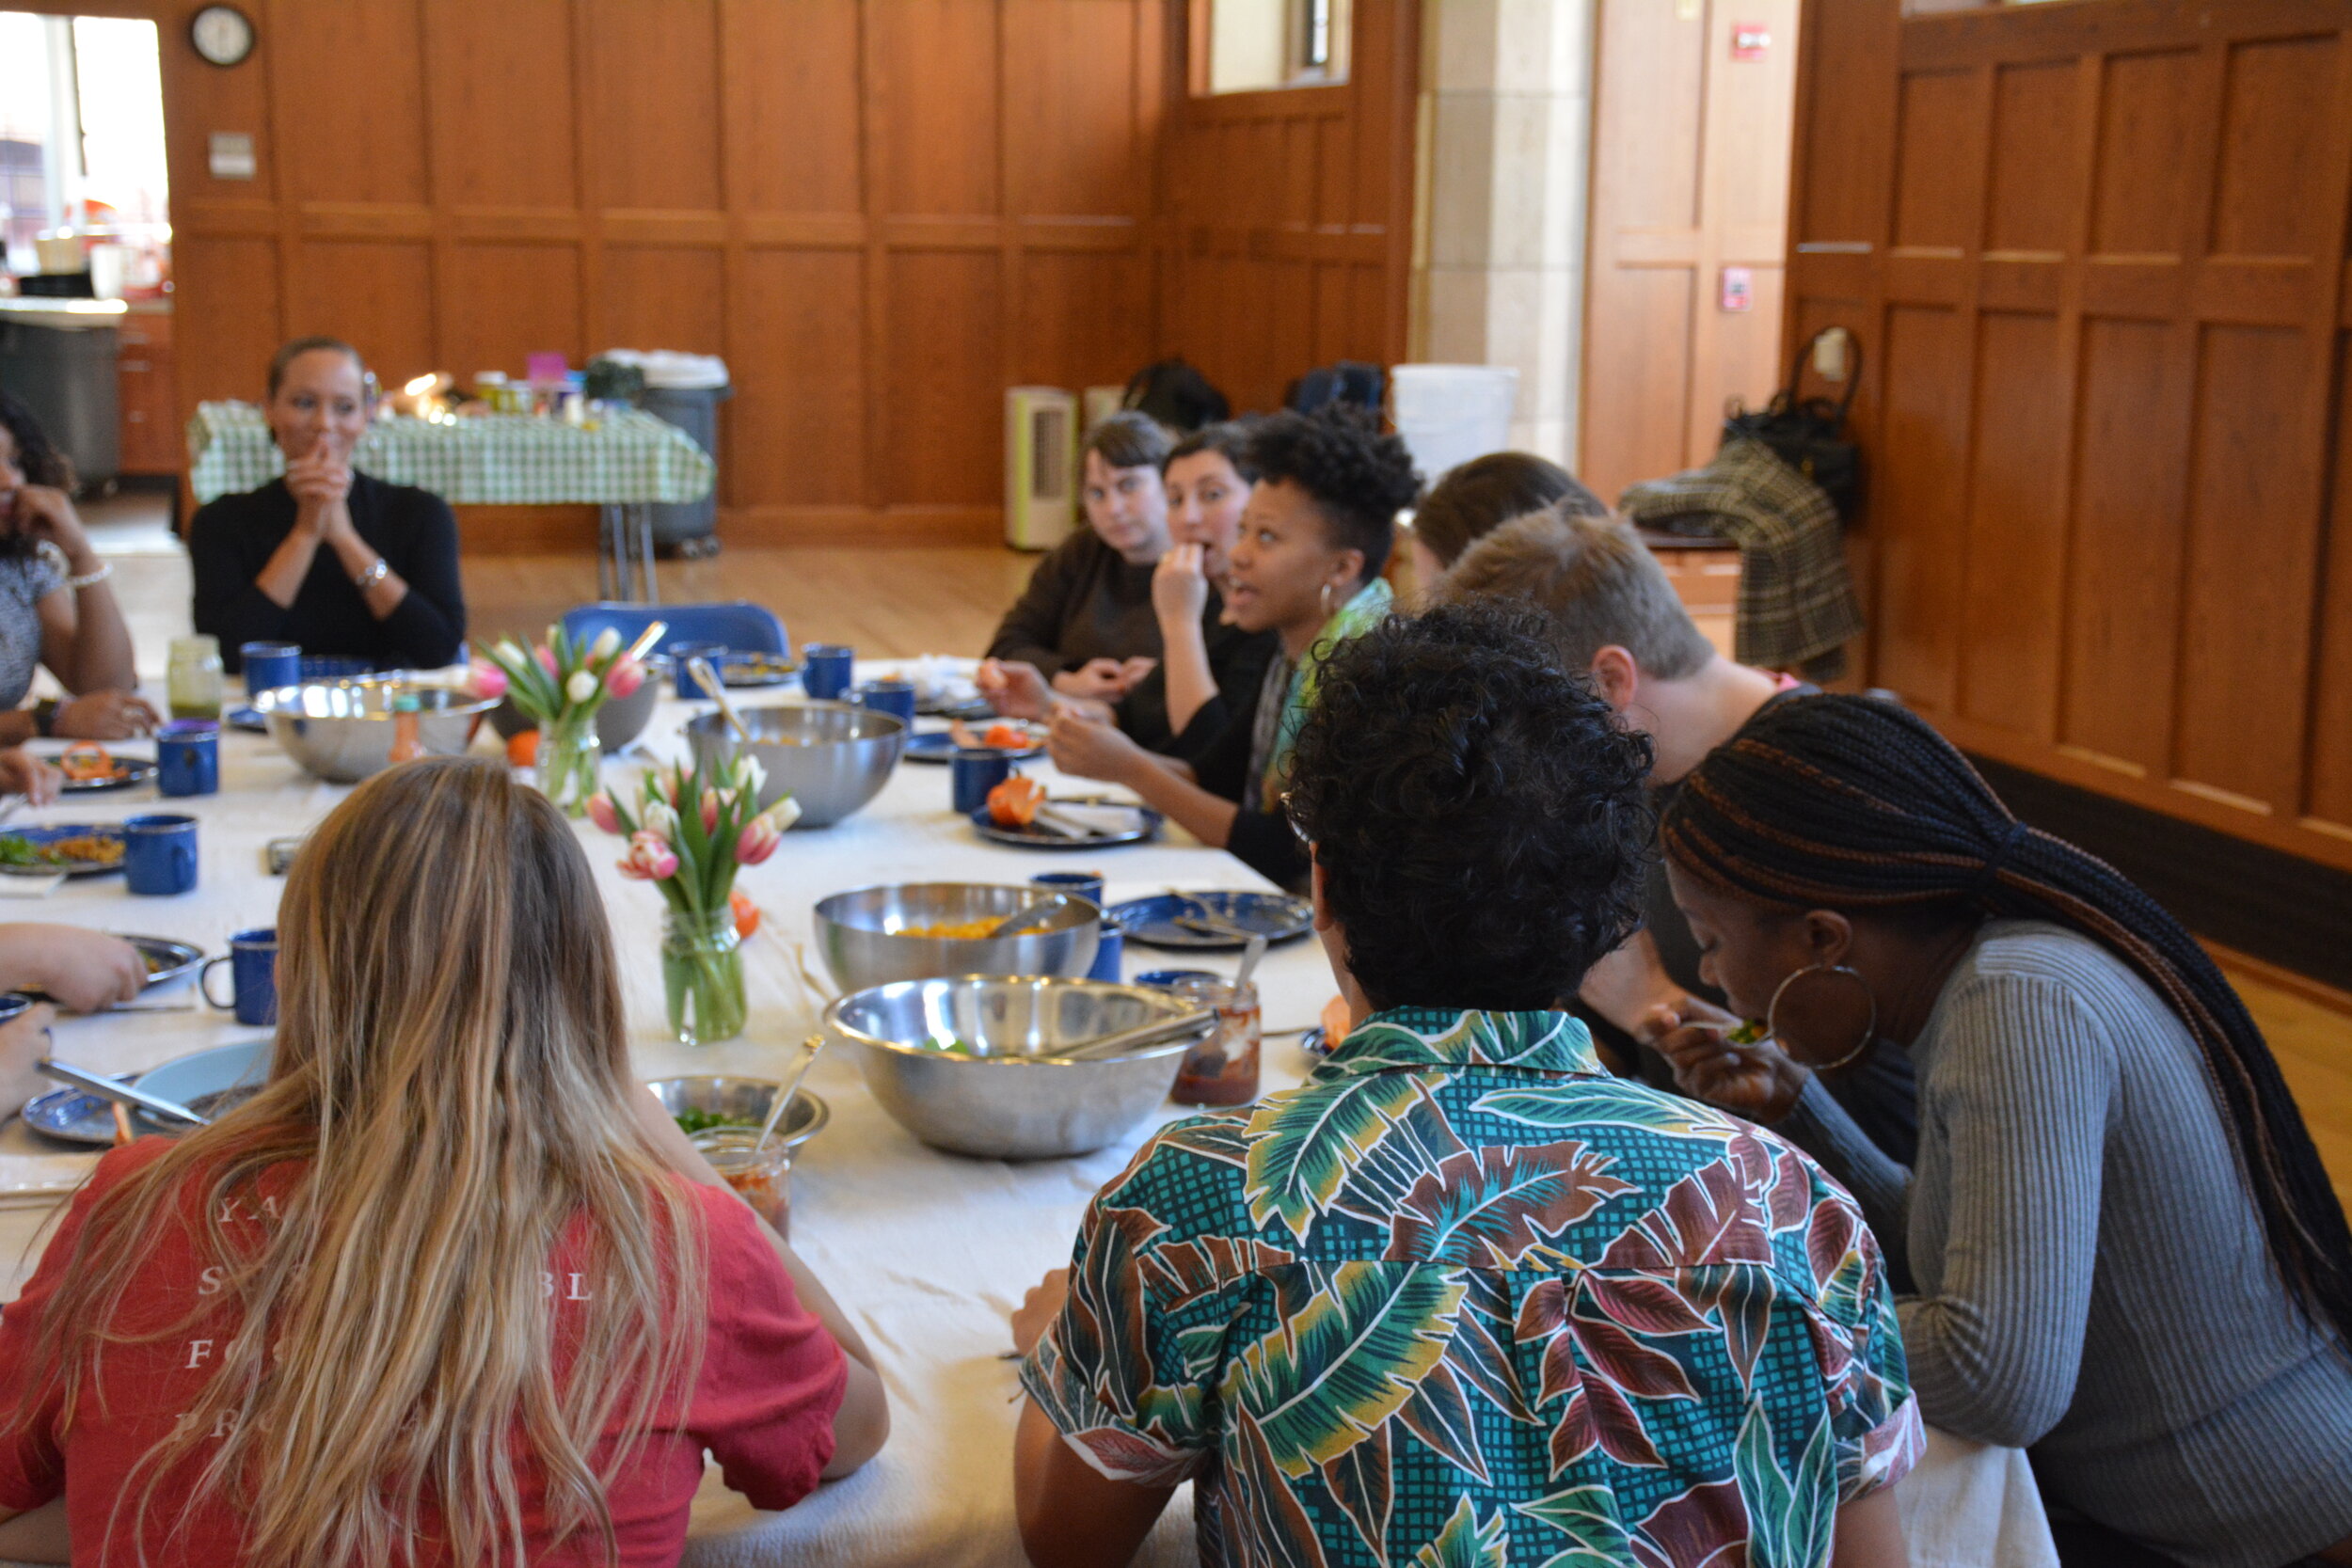  Students, staff, and community members enjoy conversation together at lunch with Kiki.  